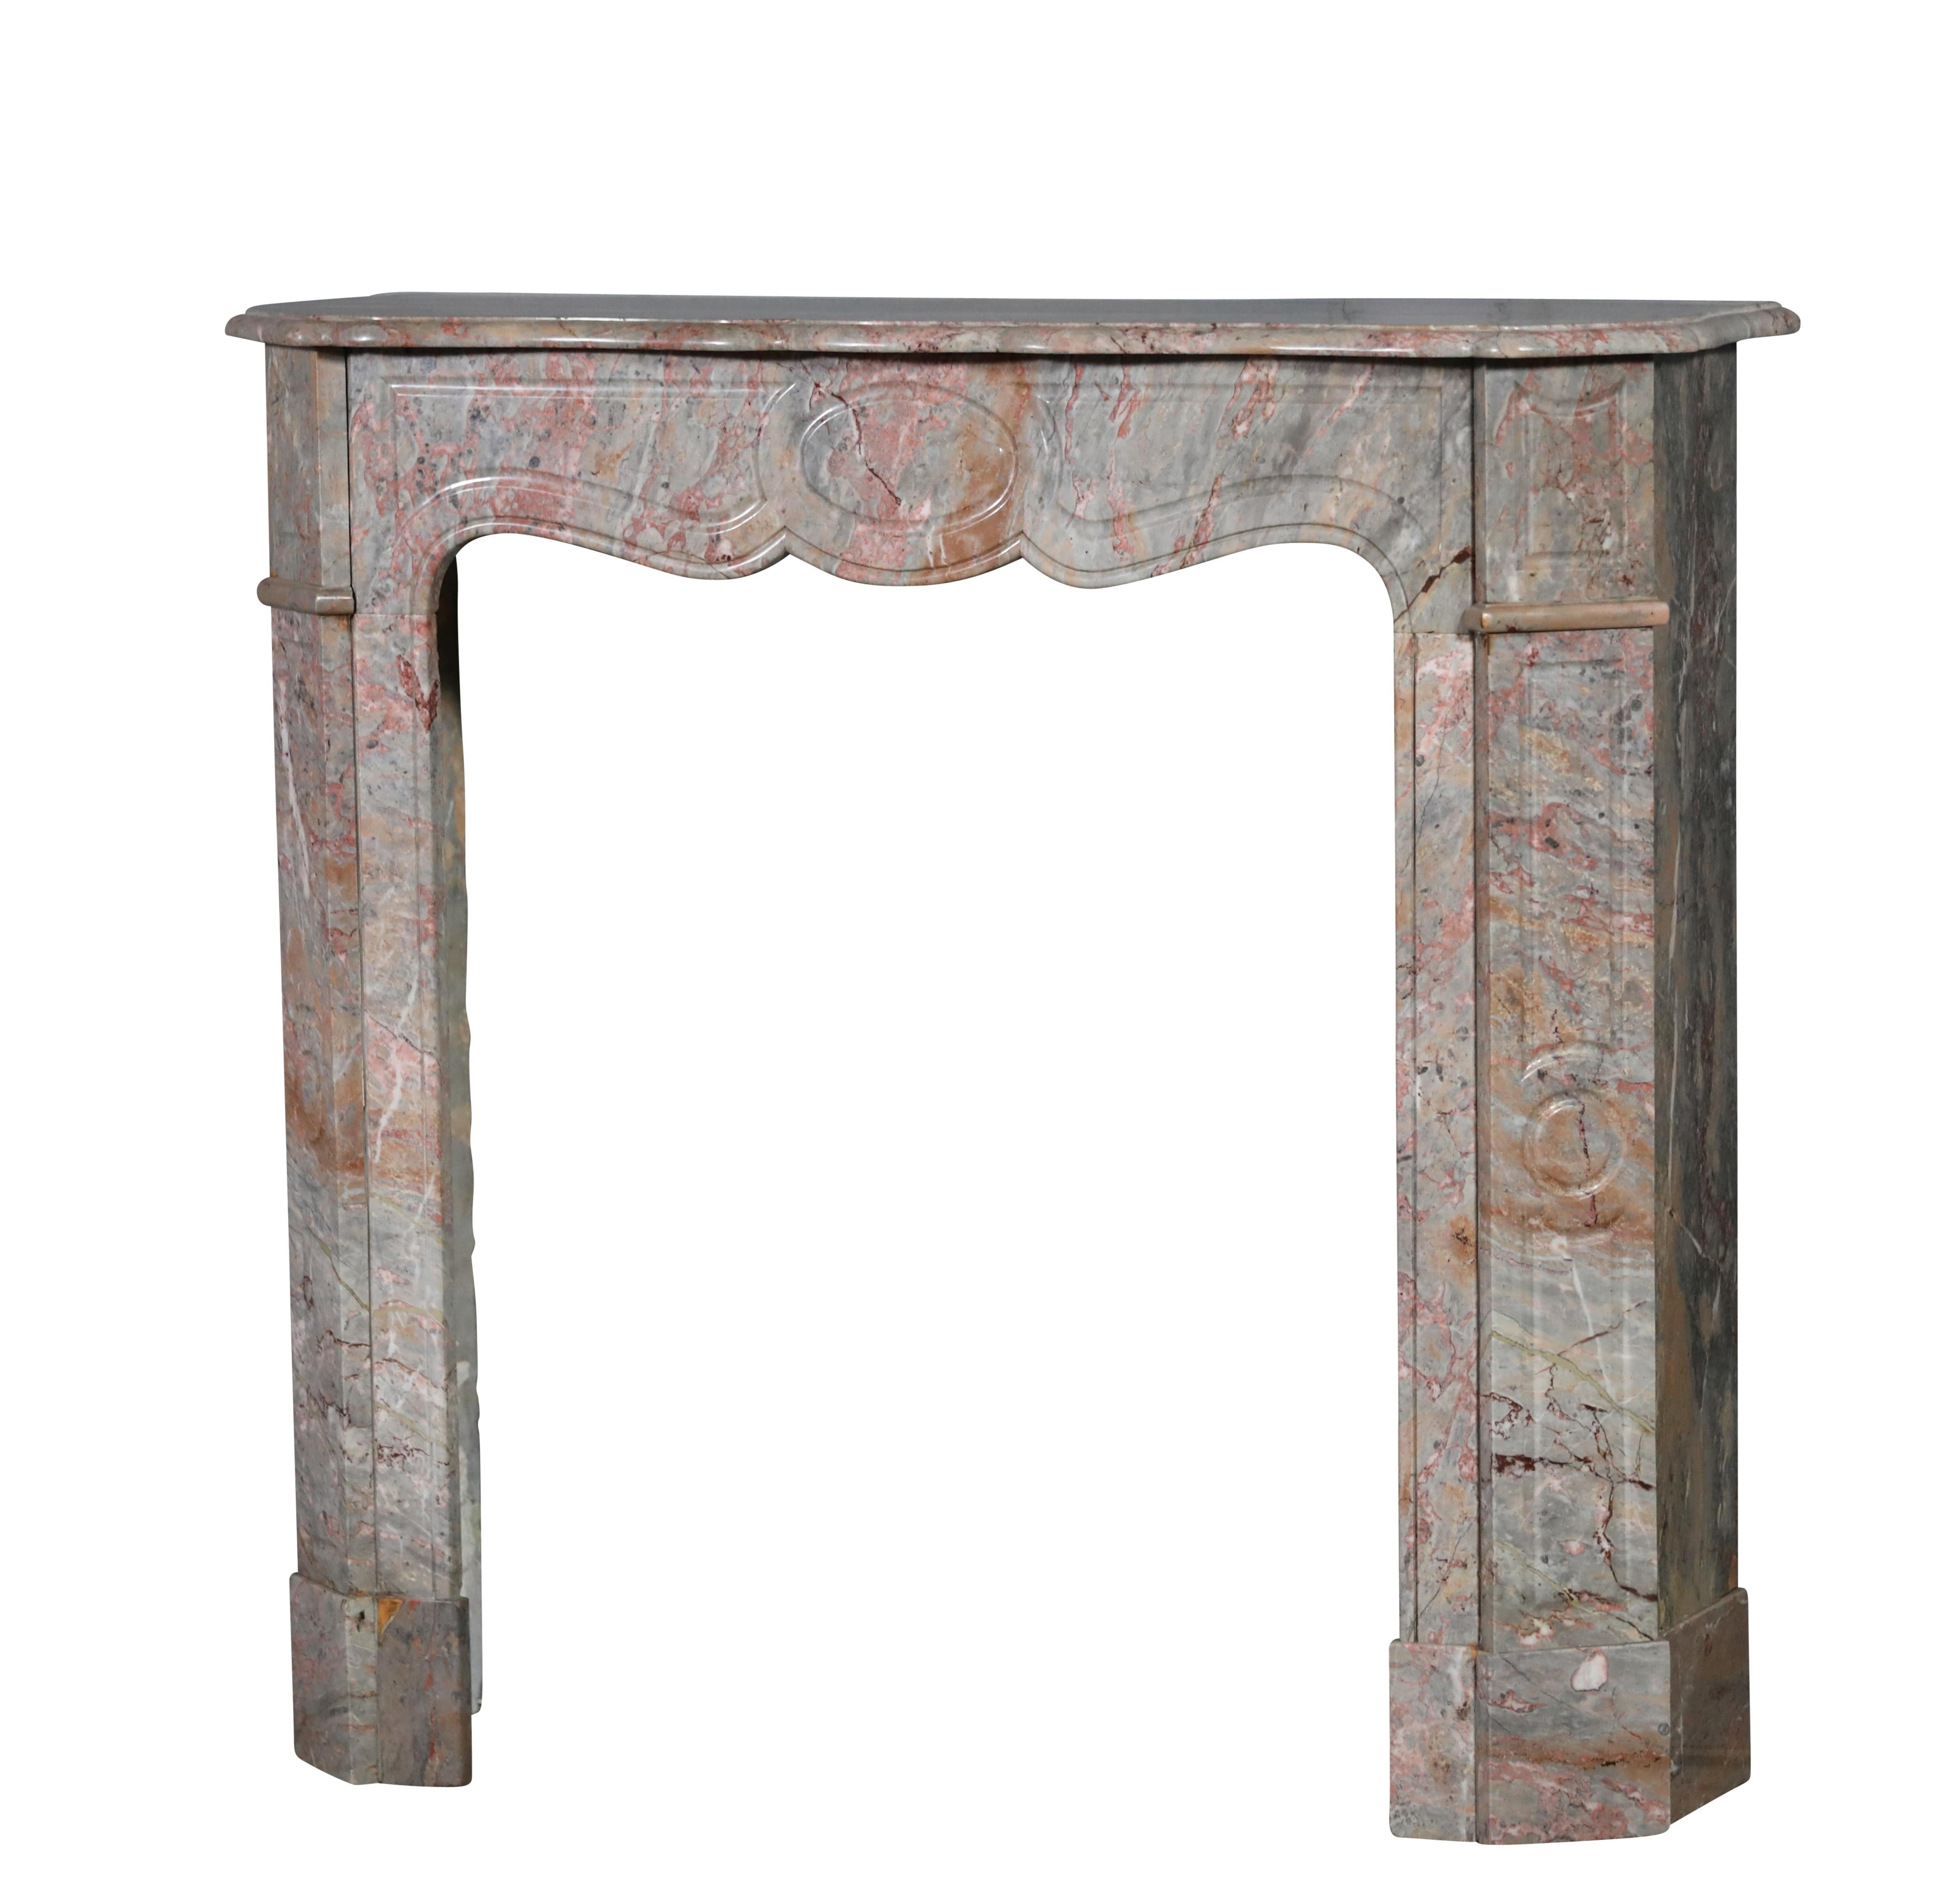 Hand-Carved Parisian Pompadour Pink Marble Fireplace Surround From Paris For Sale